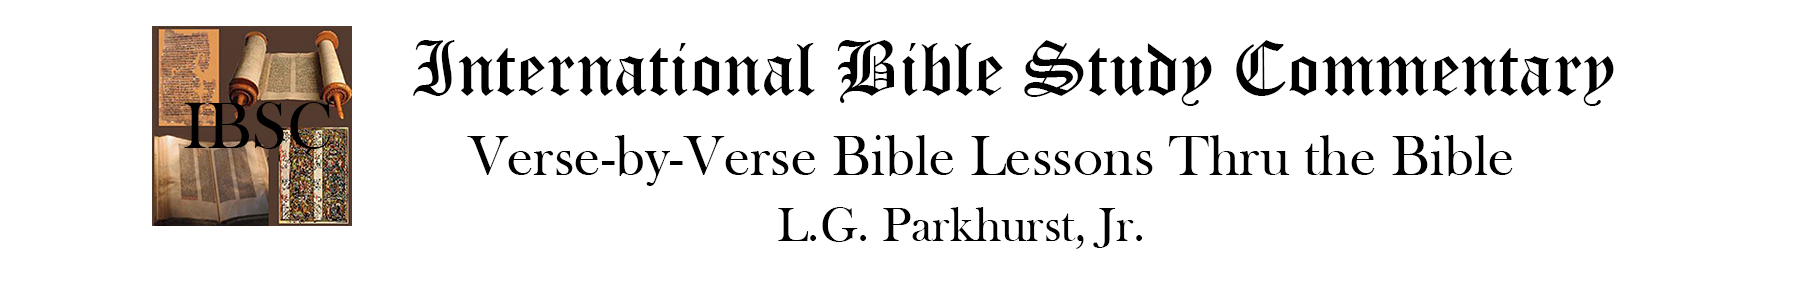 Logo for International Bible Study Commentary